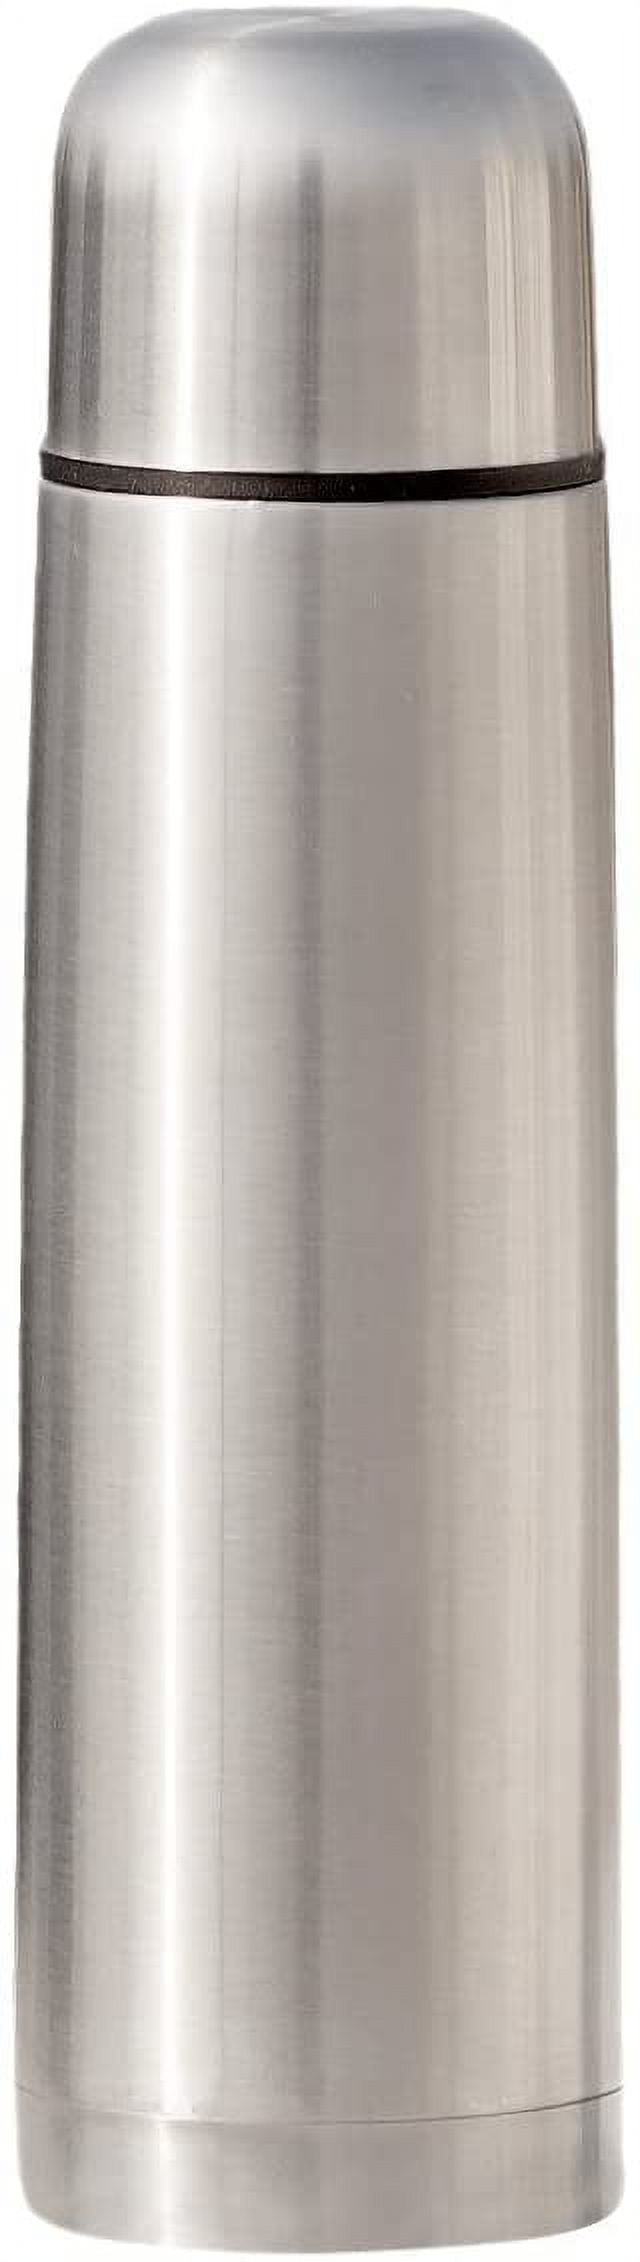 Best Stainless Steel Coffee Thermos, BPA Free, New Triple Wall Insulated,  Hot & Cold for Hours, Perfect for Biking, Backpack, Camping, Office or Car  